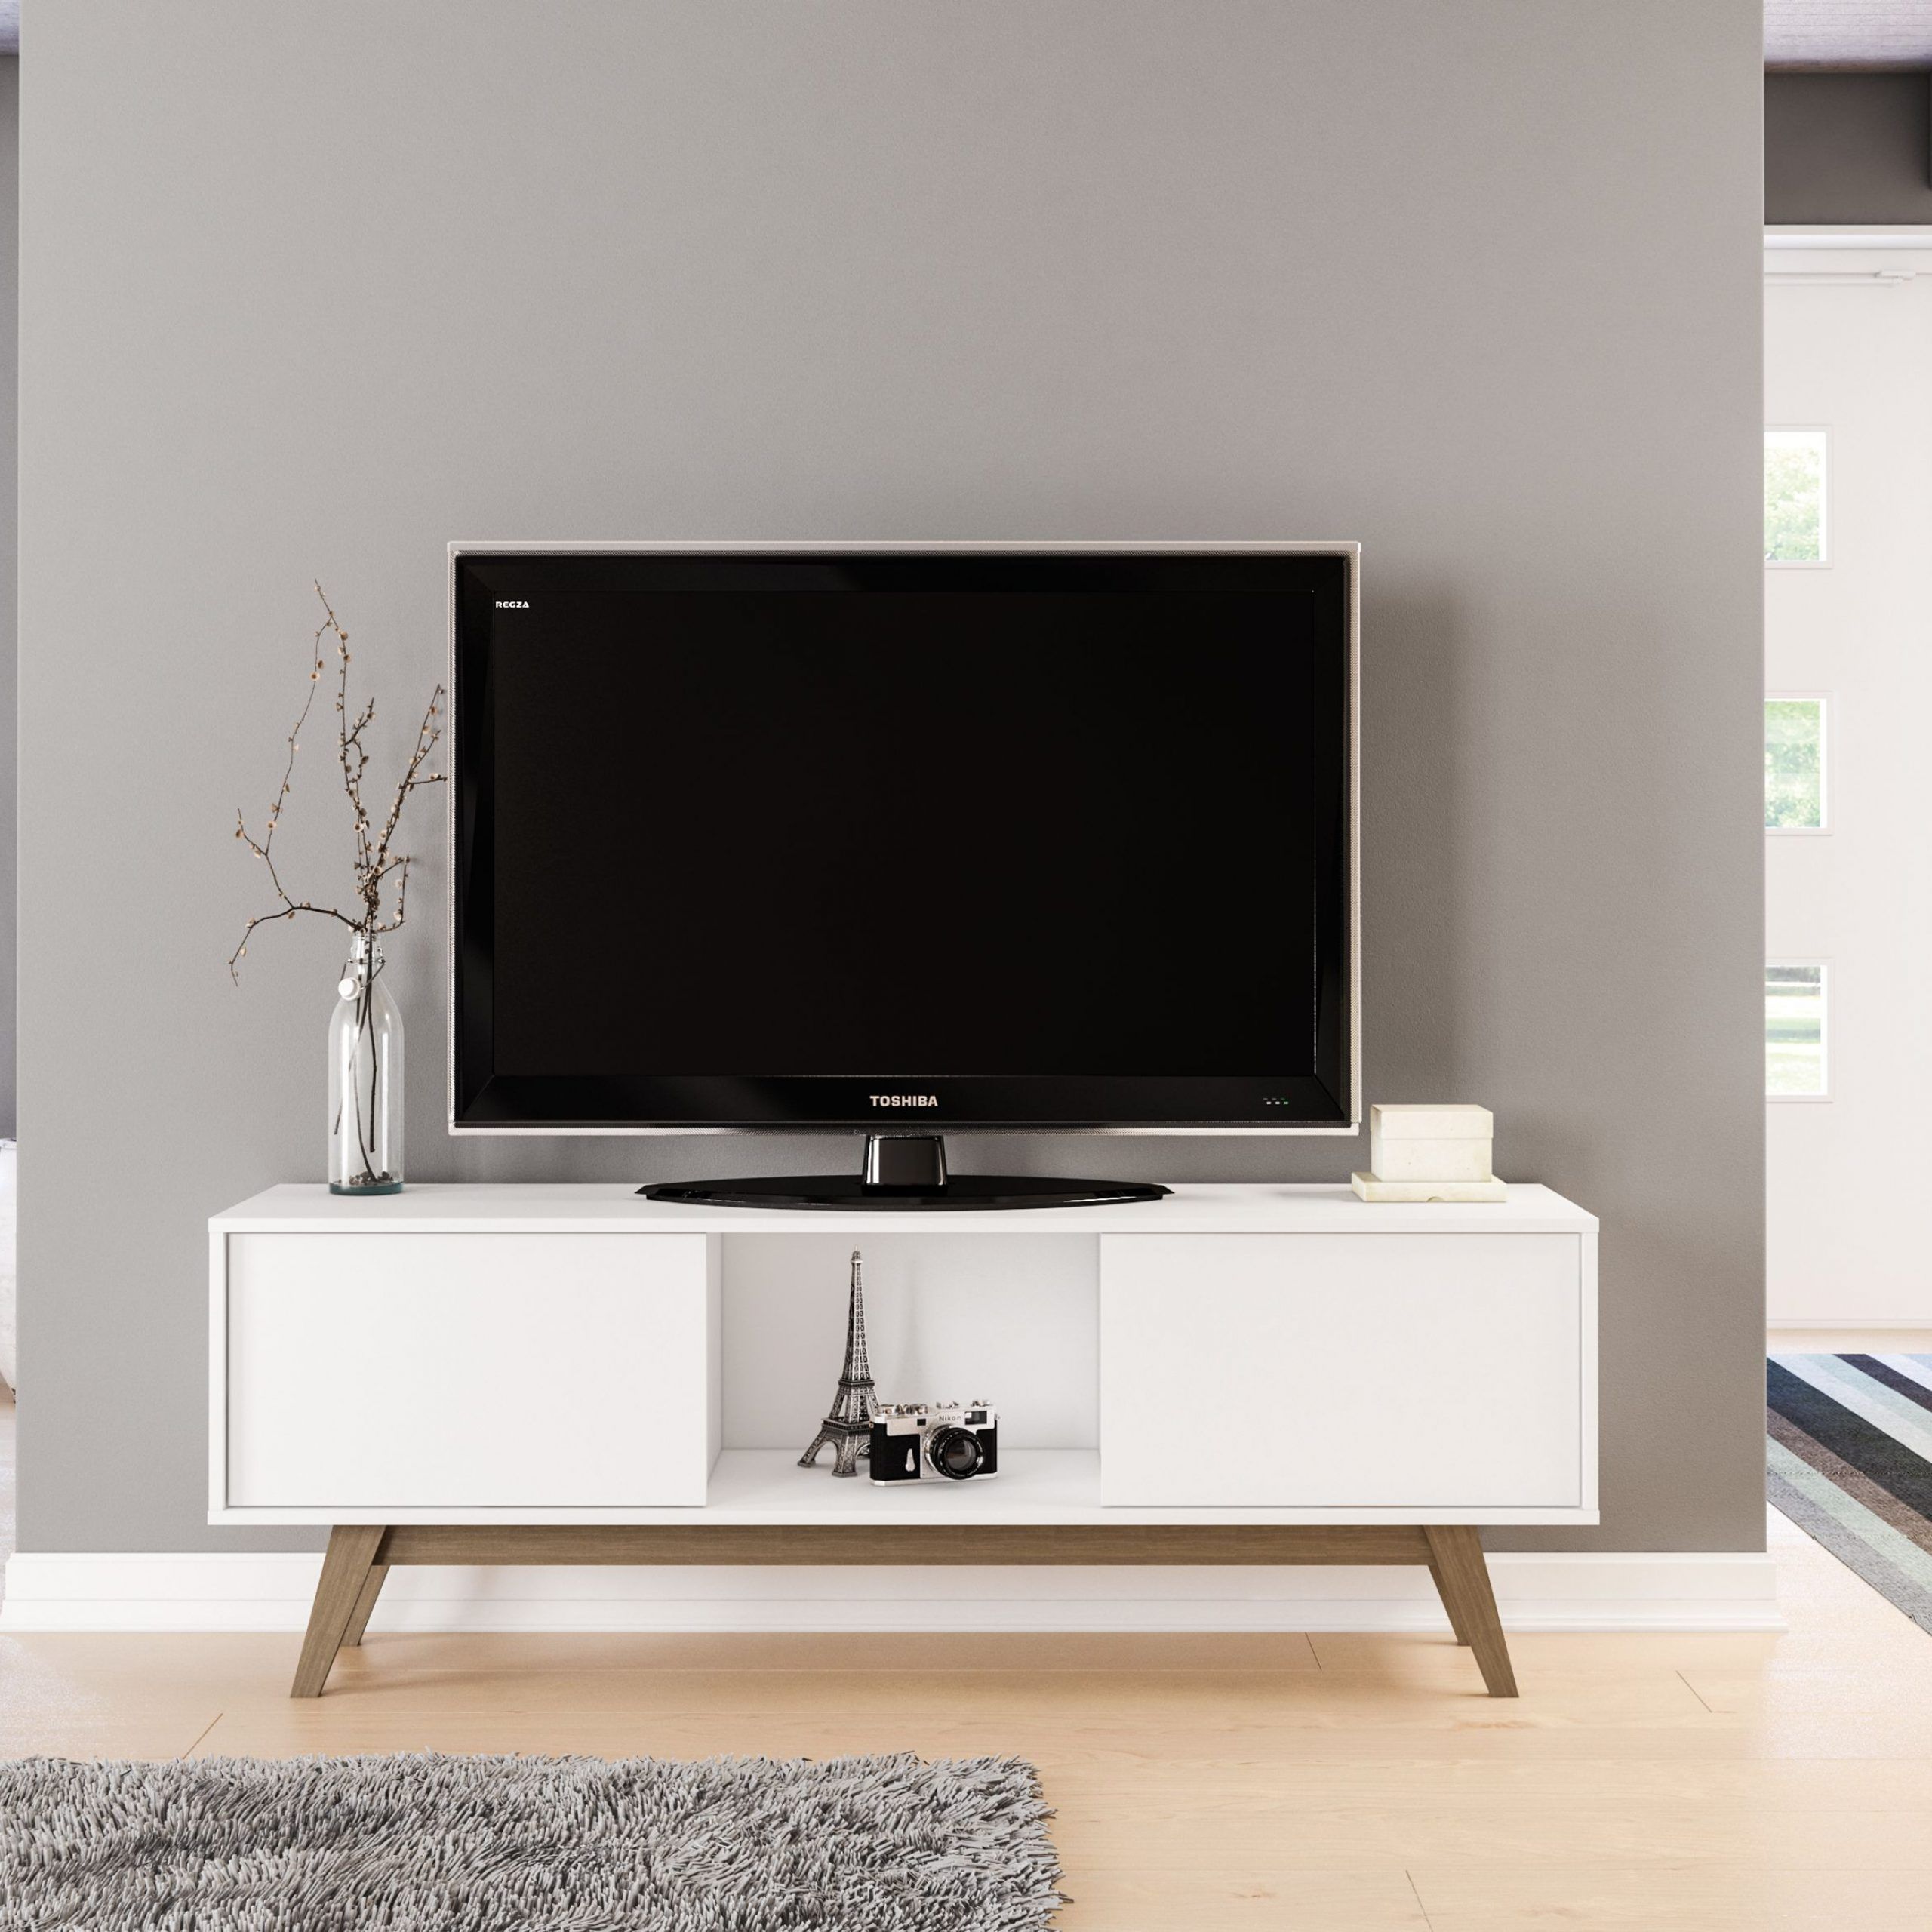 Polifurniture Porto Rico 59 Inch Tv Stand, White And Light Throughout Light Brown Tv Stands (View 10 of 15)